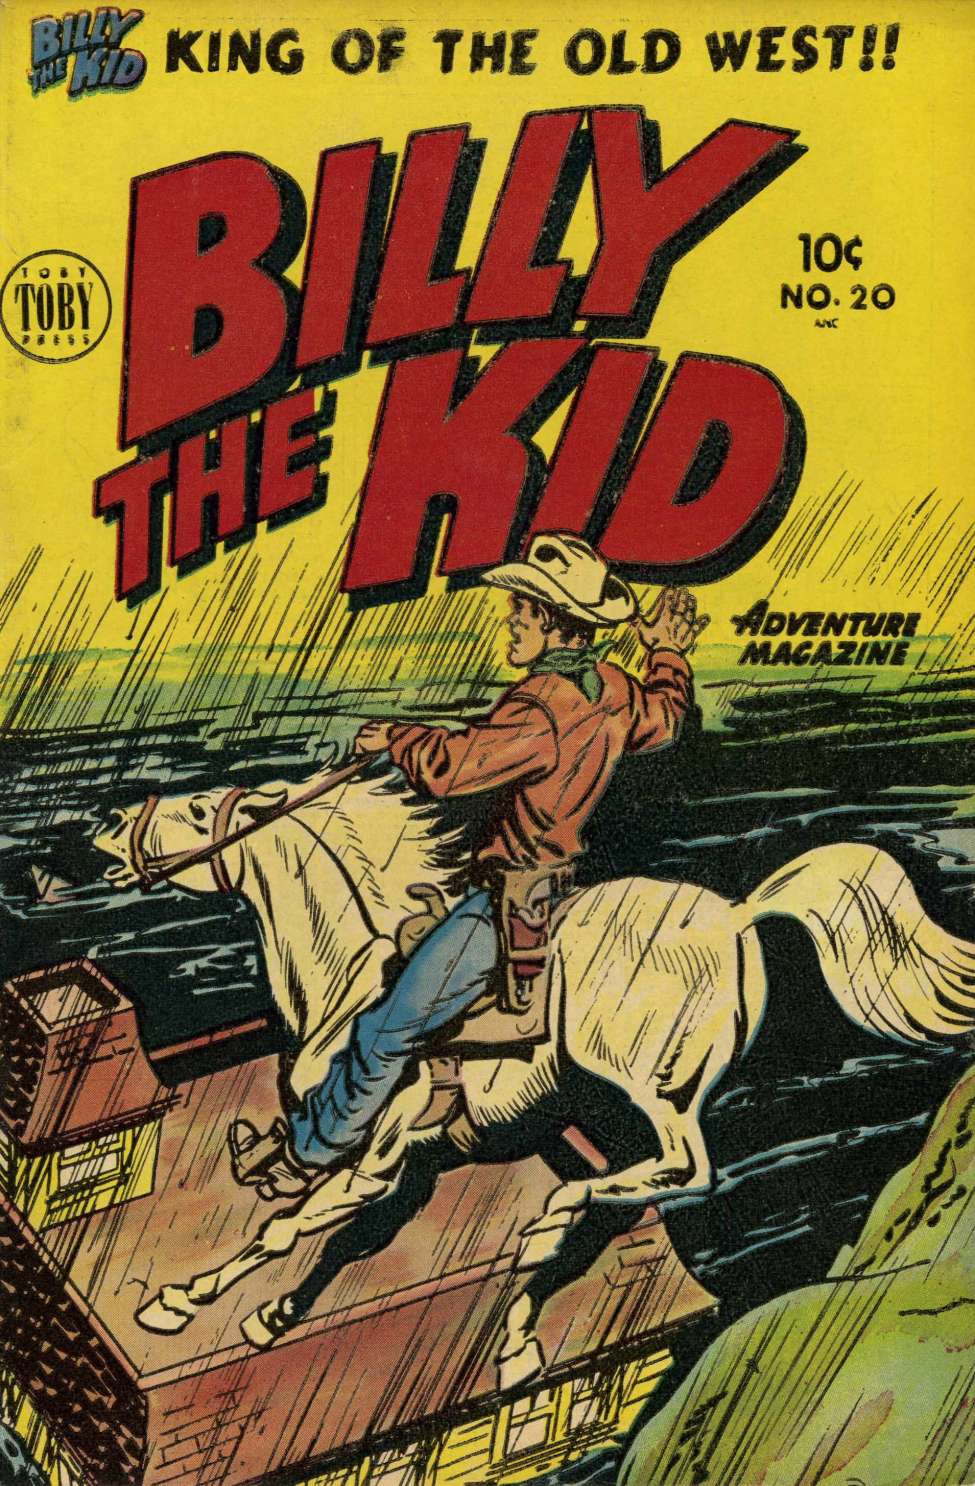 Comic Book Cover For Billy the Kid Adventure Magazine 20